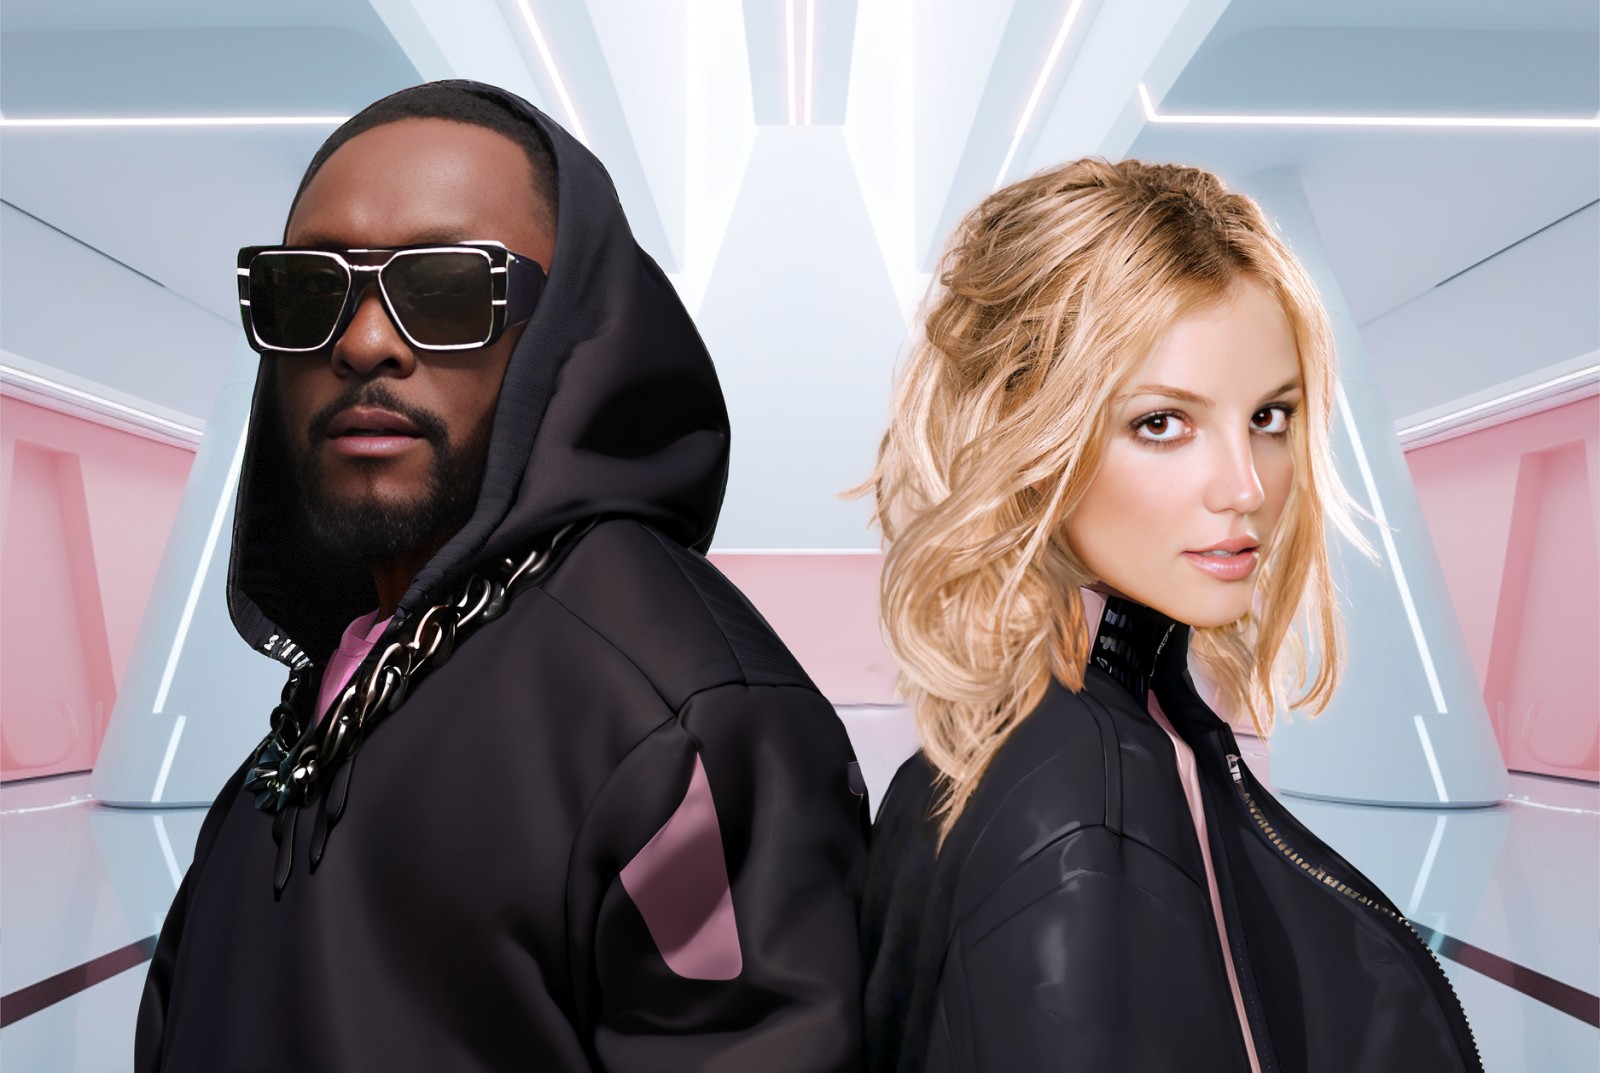 Multi-platinum rapper and producer will.i.am teams up with Britney Spears on new single “MIND YOUR BUSINESS”